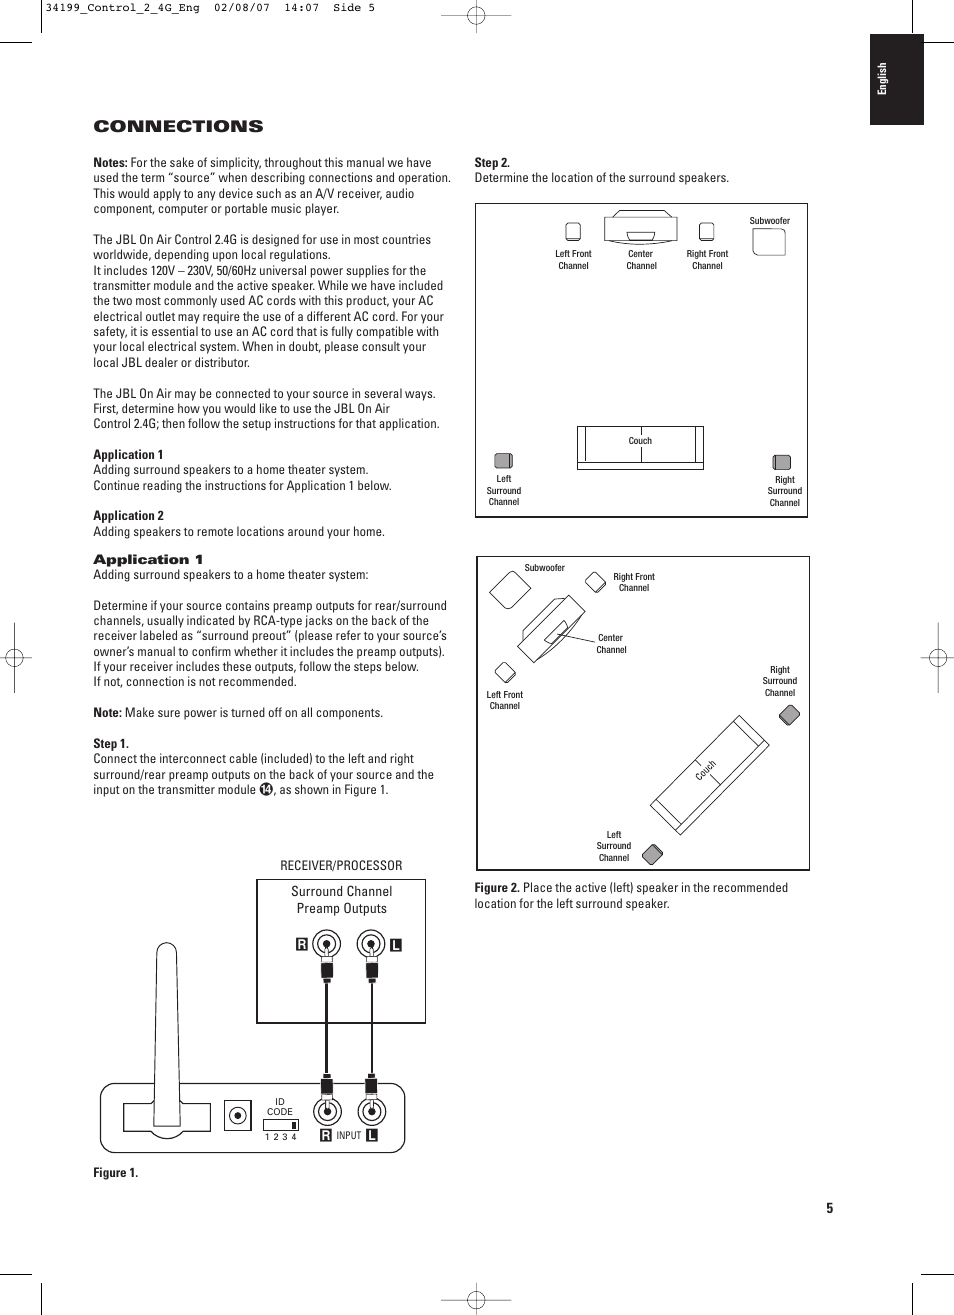 Connections | JBL CONTROL 2.4G User Manual | Page 5 / 12 | Original mode